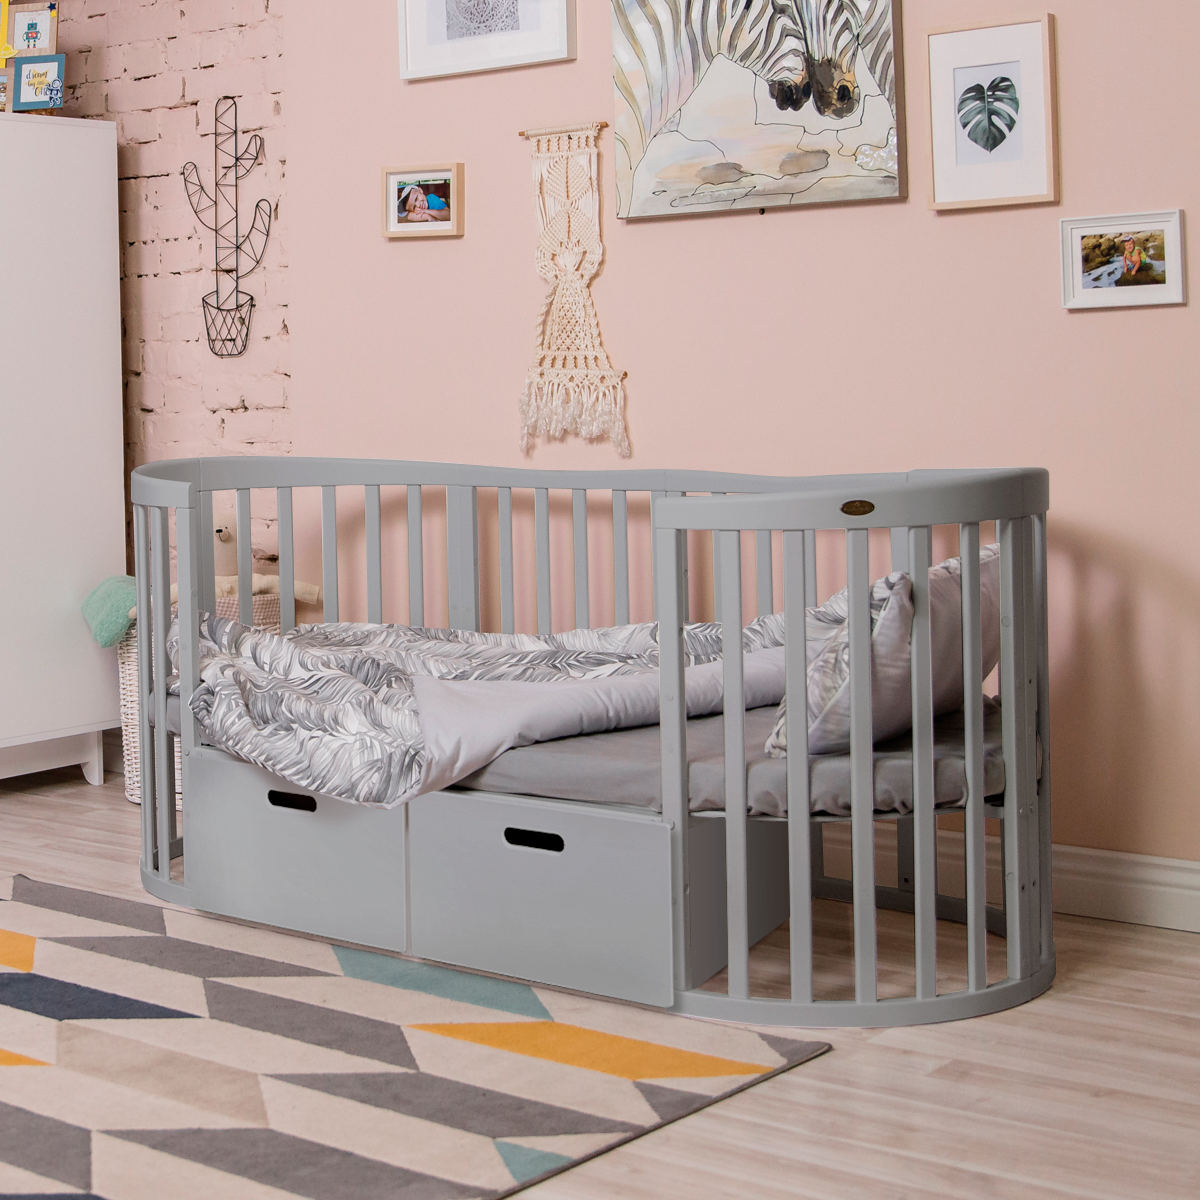 Drawer for Oval Baby Cribs